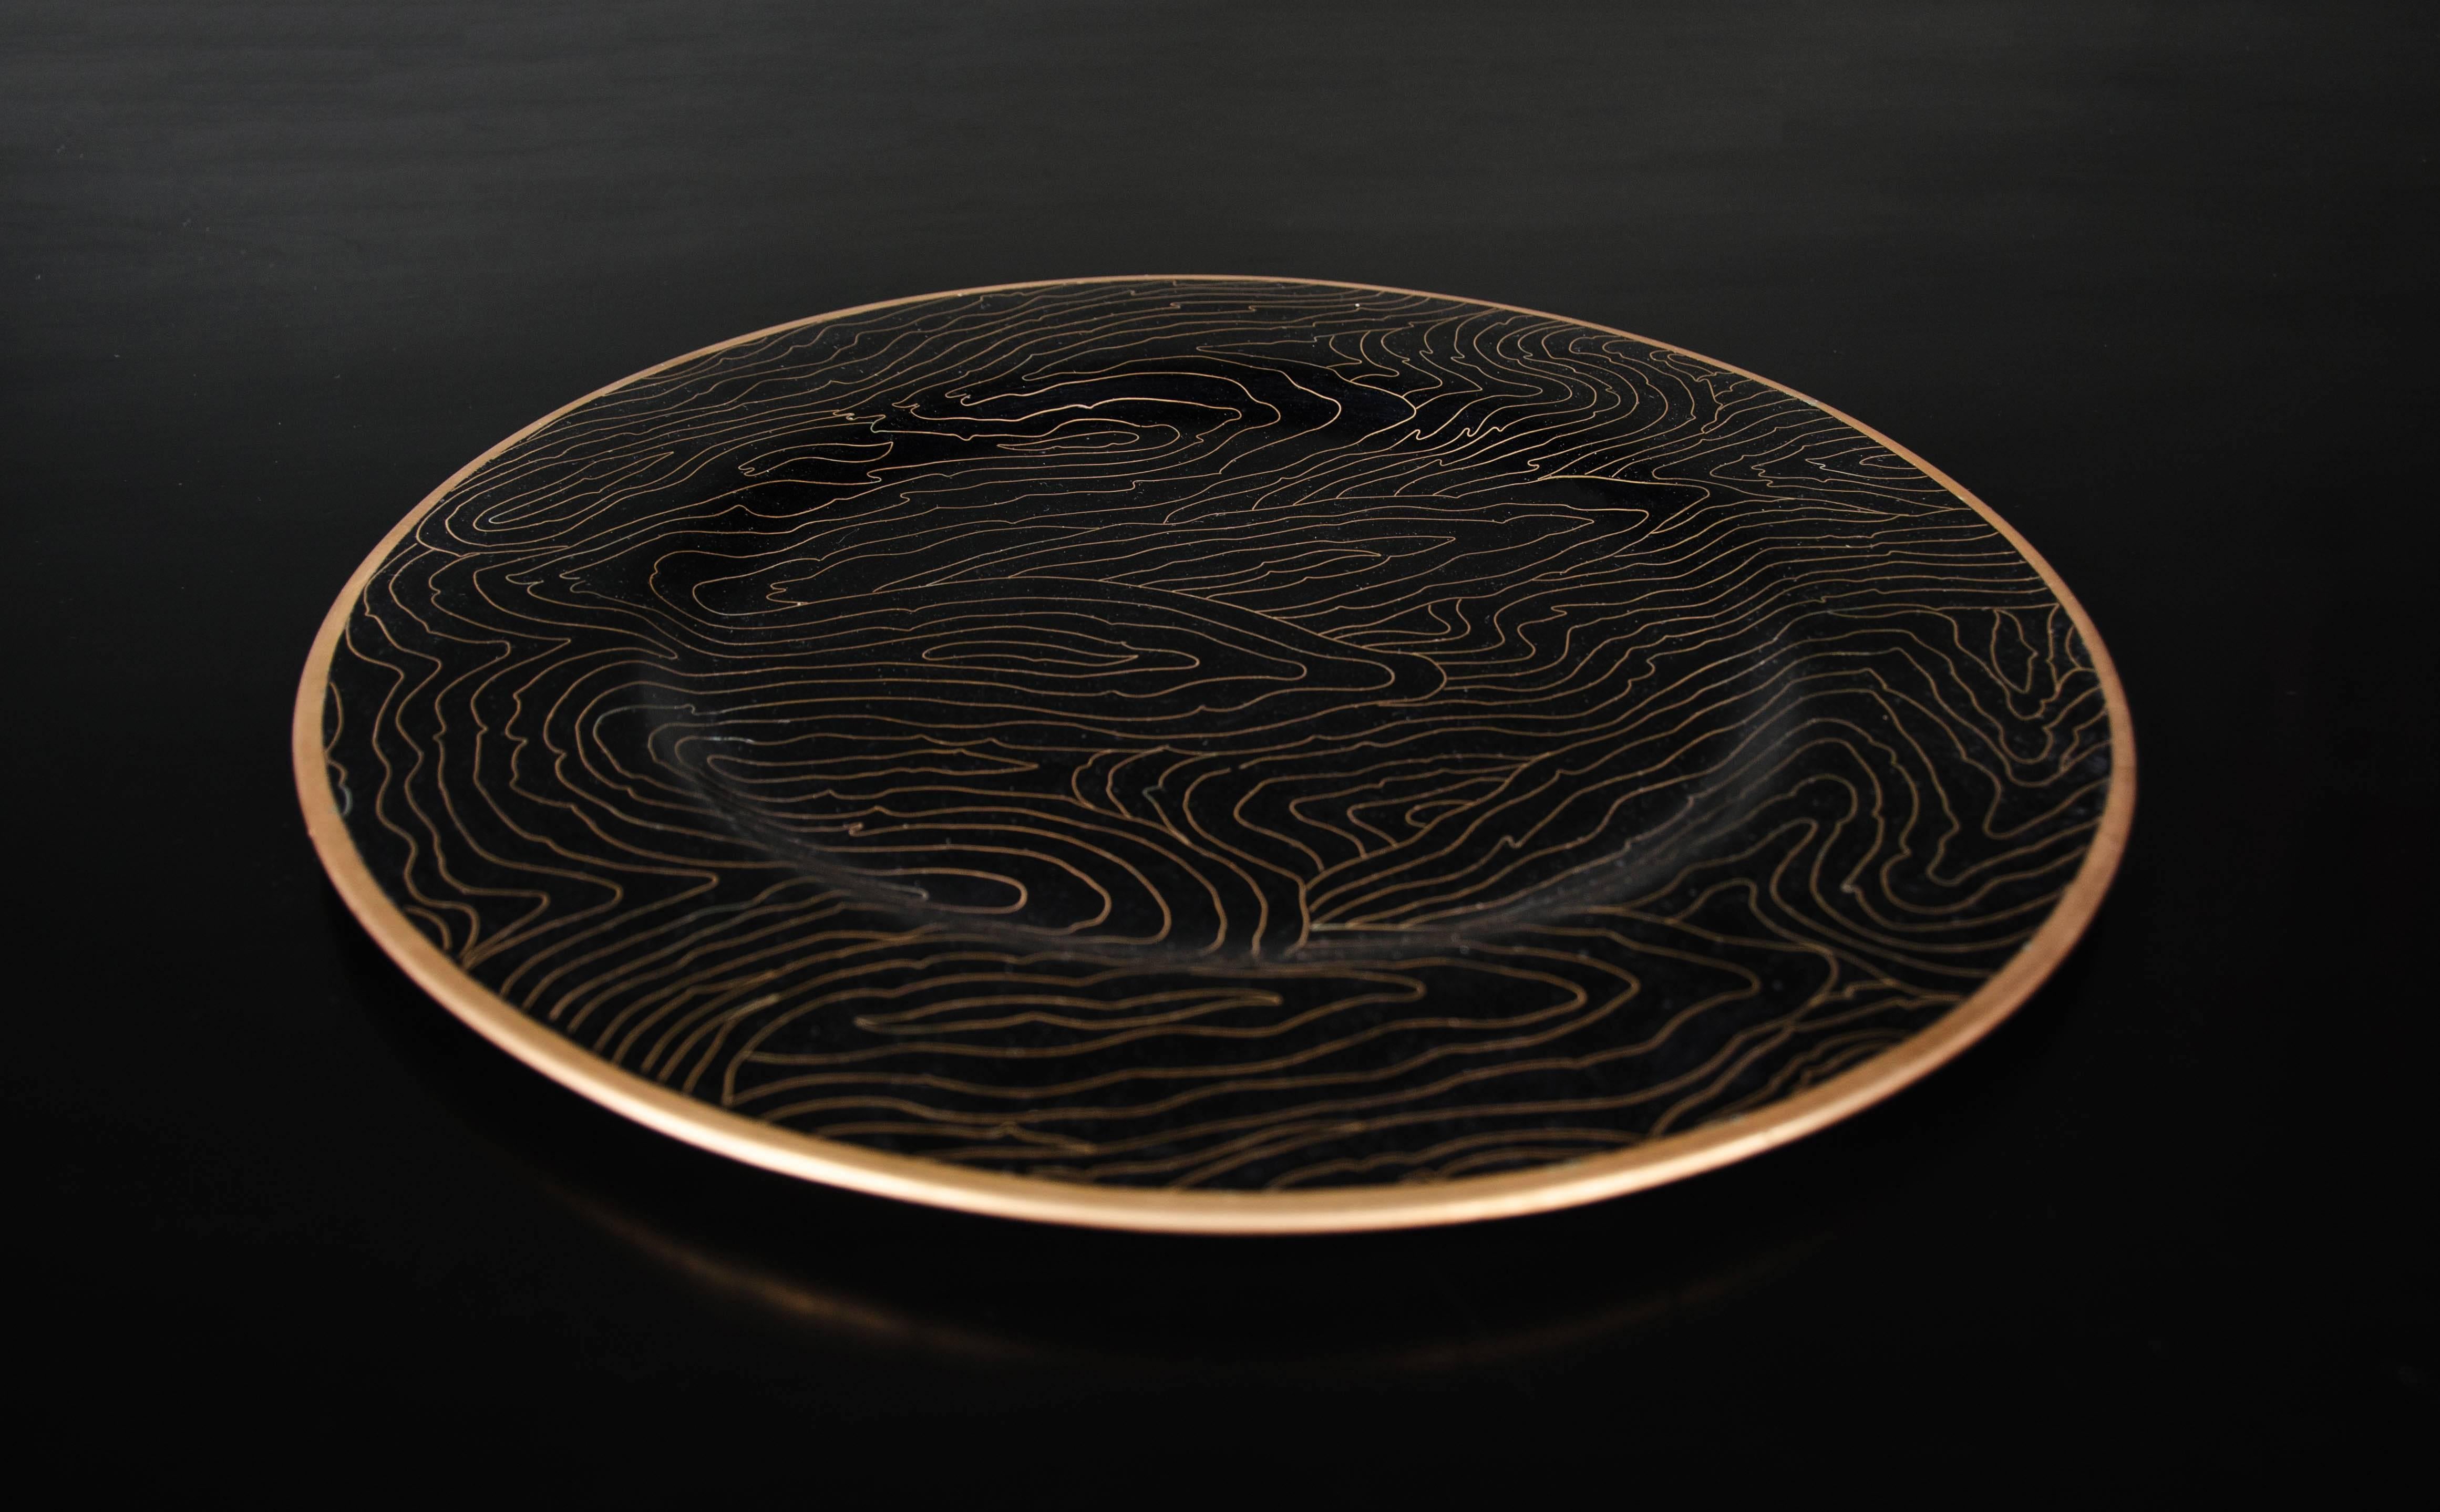 Cloissoné Charger - Black Woodgrain Design Cloisonné by Robert Kuo, Limited Edition For Sale